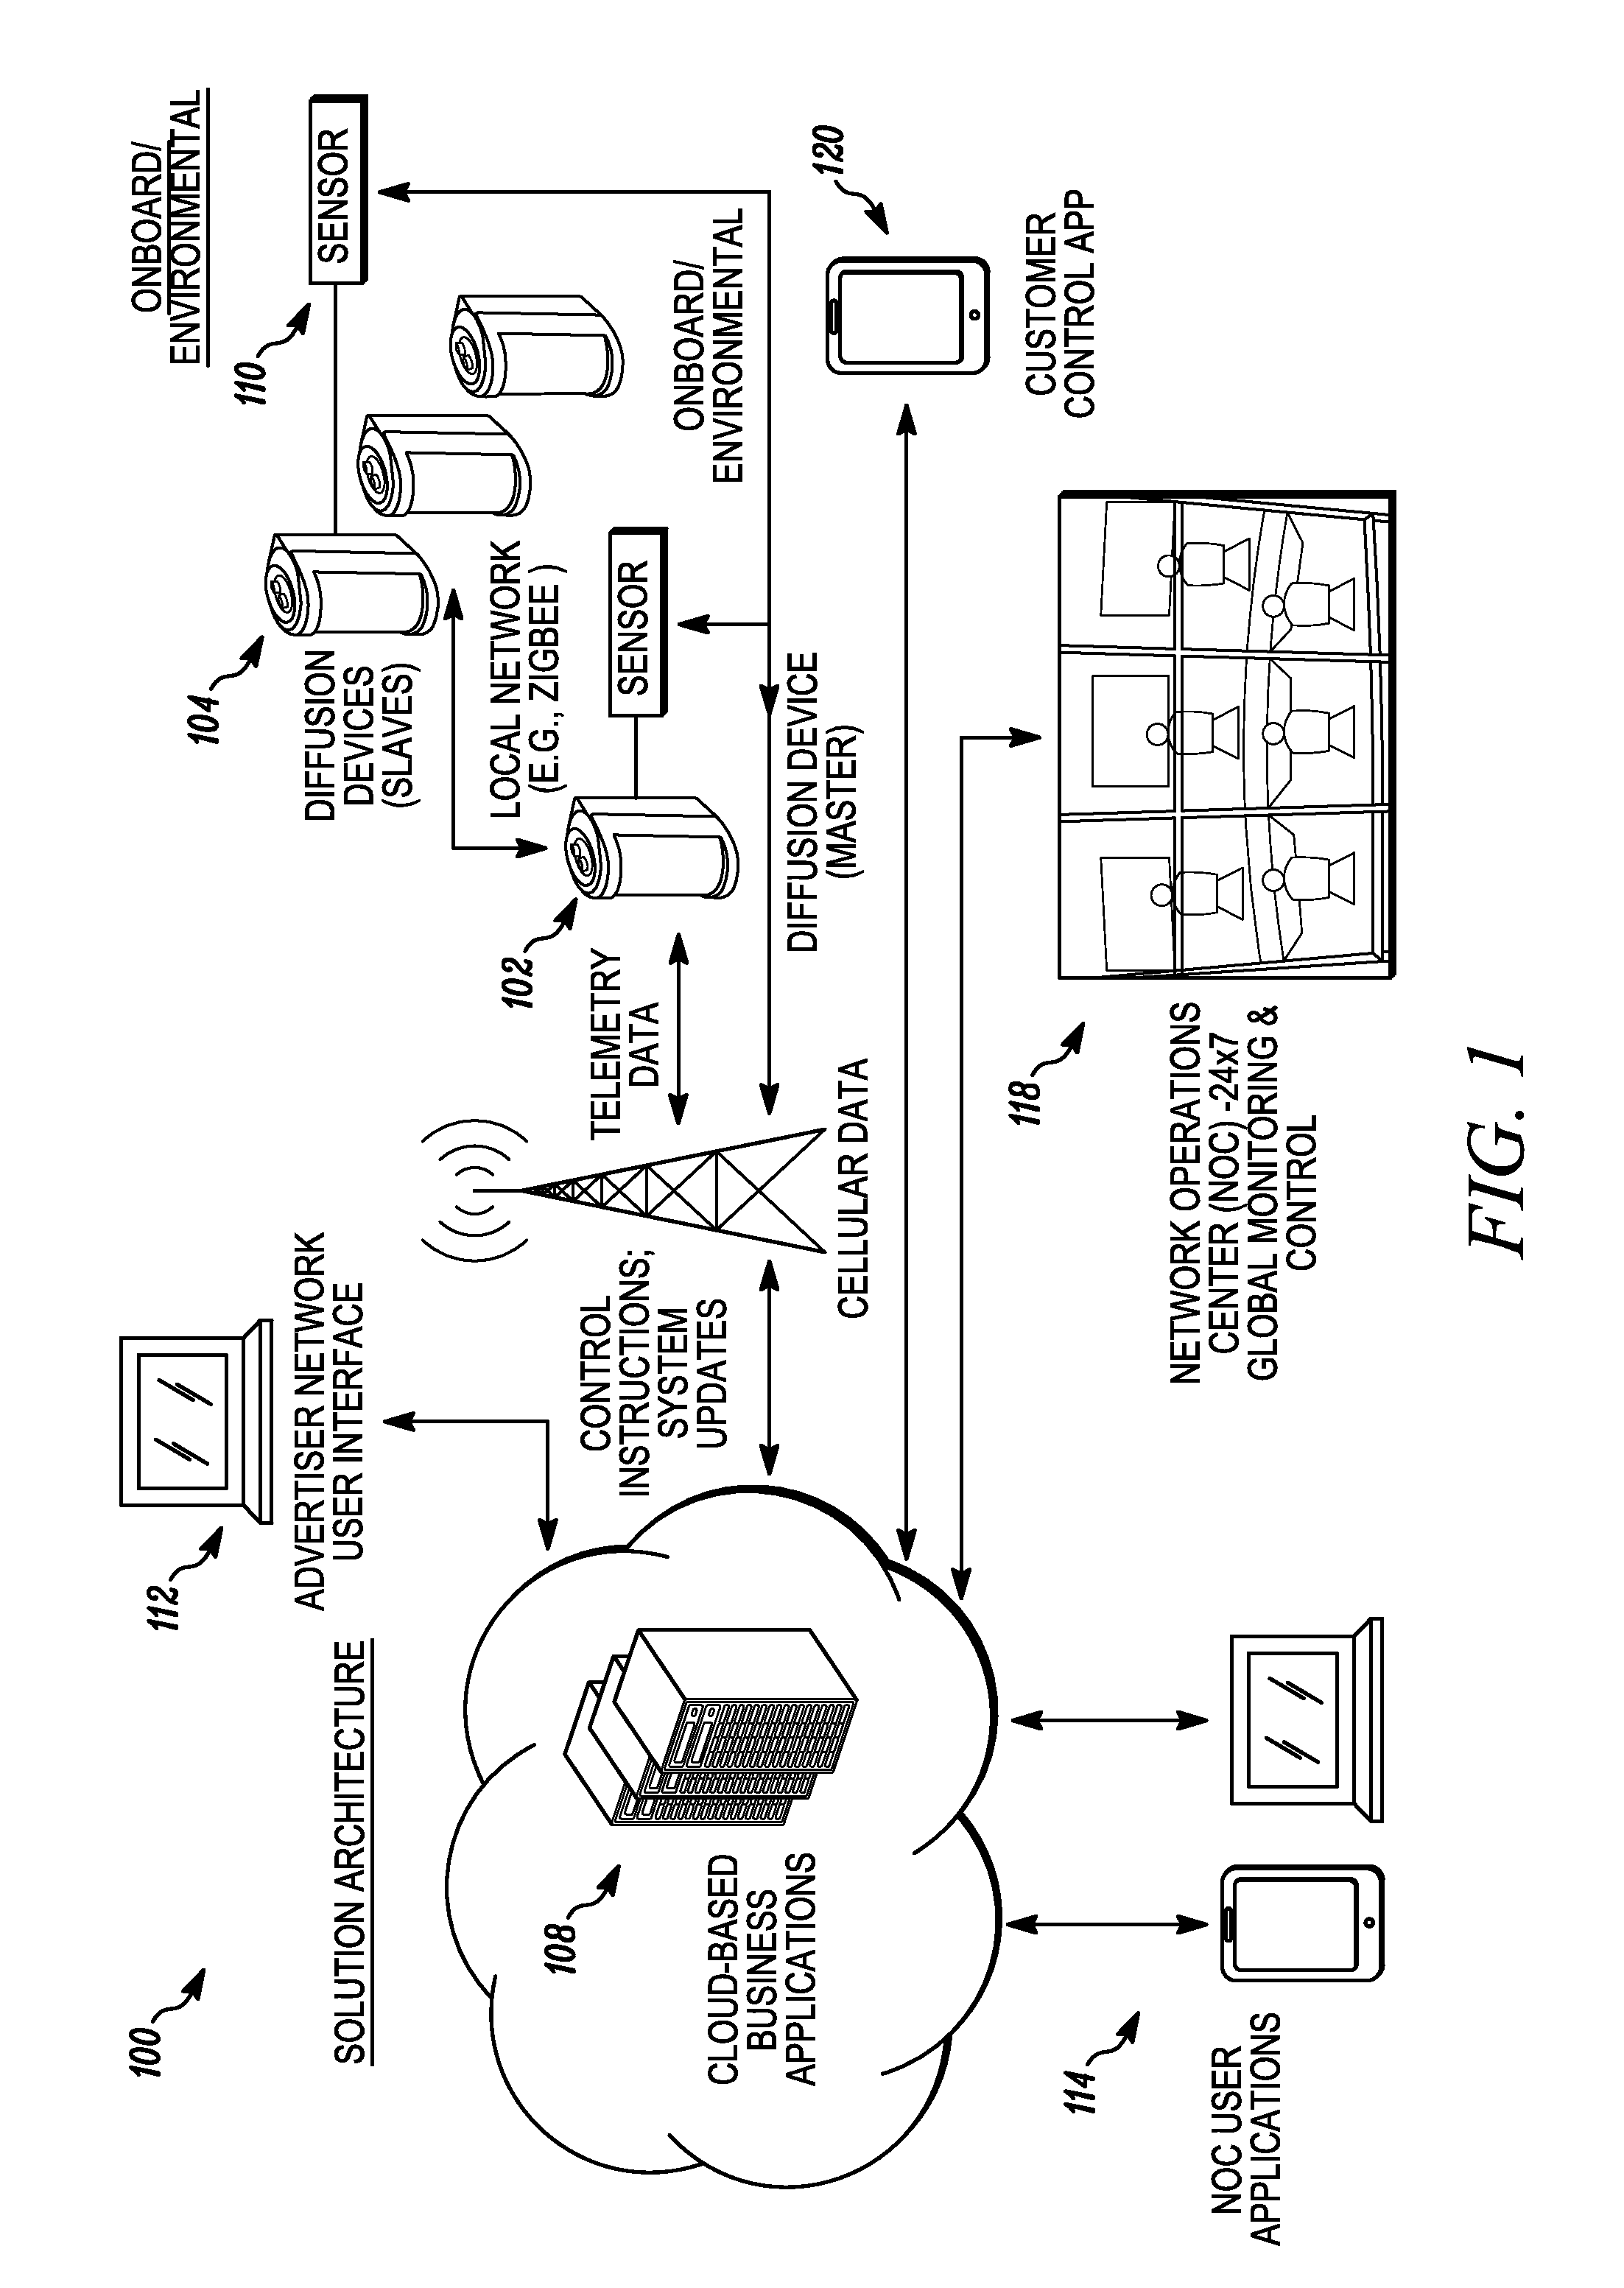 Method and system of sensor feedback for a scent diffusion device